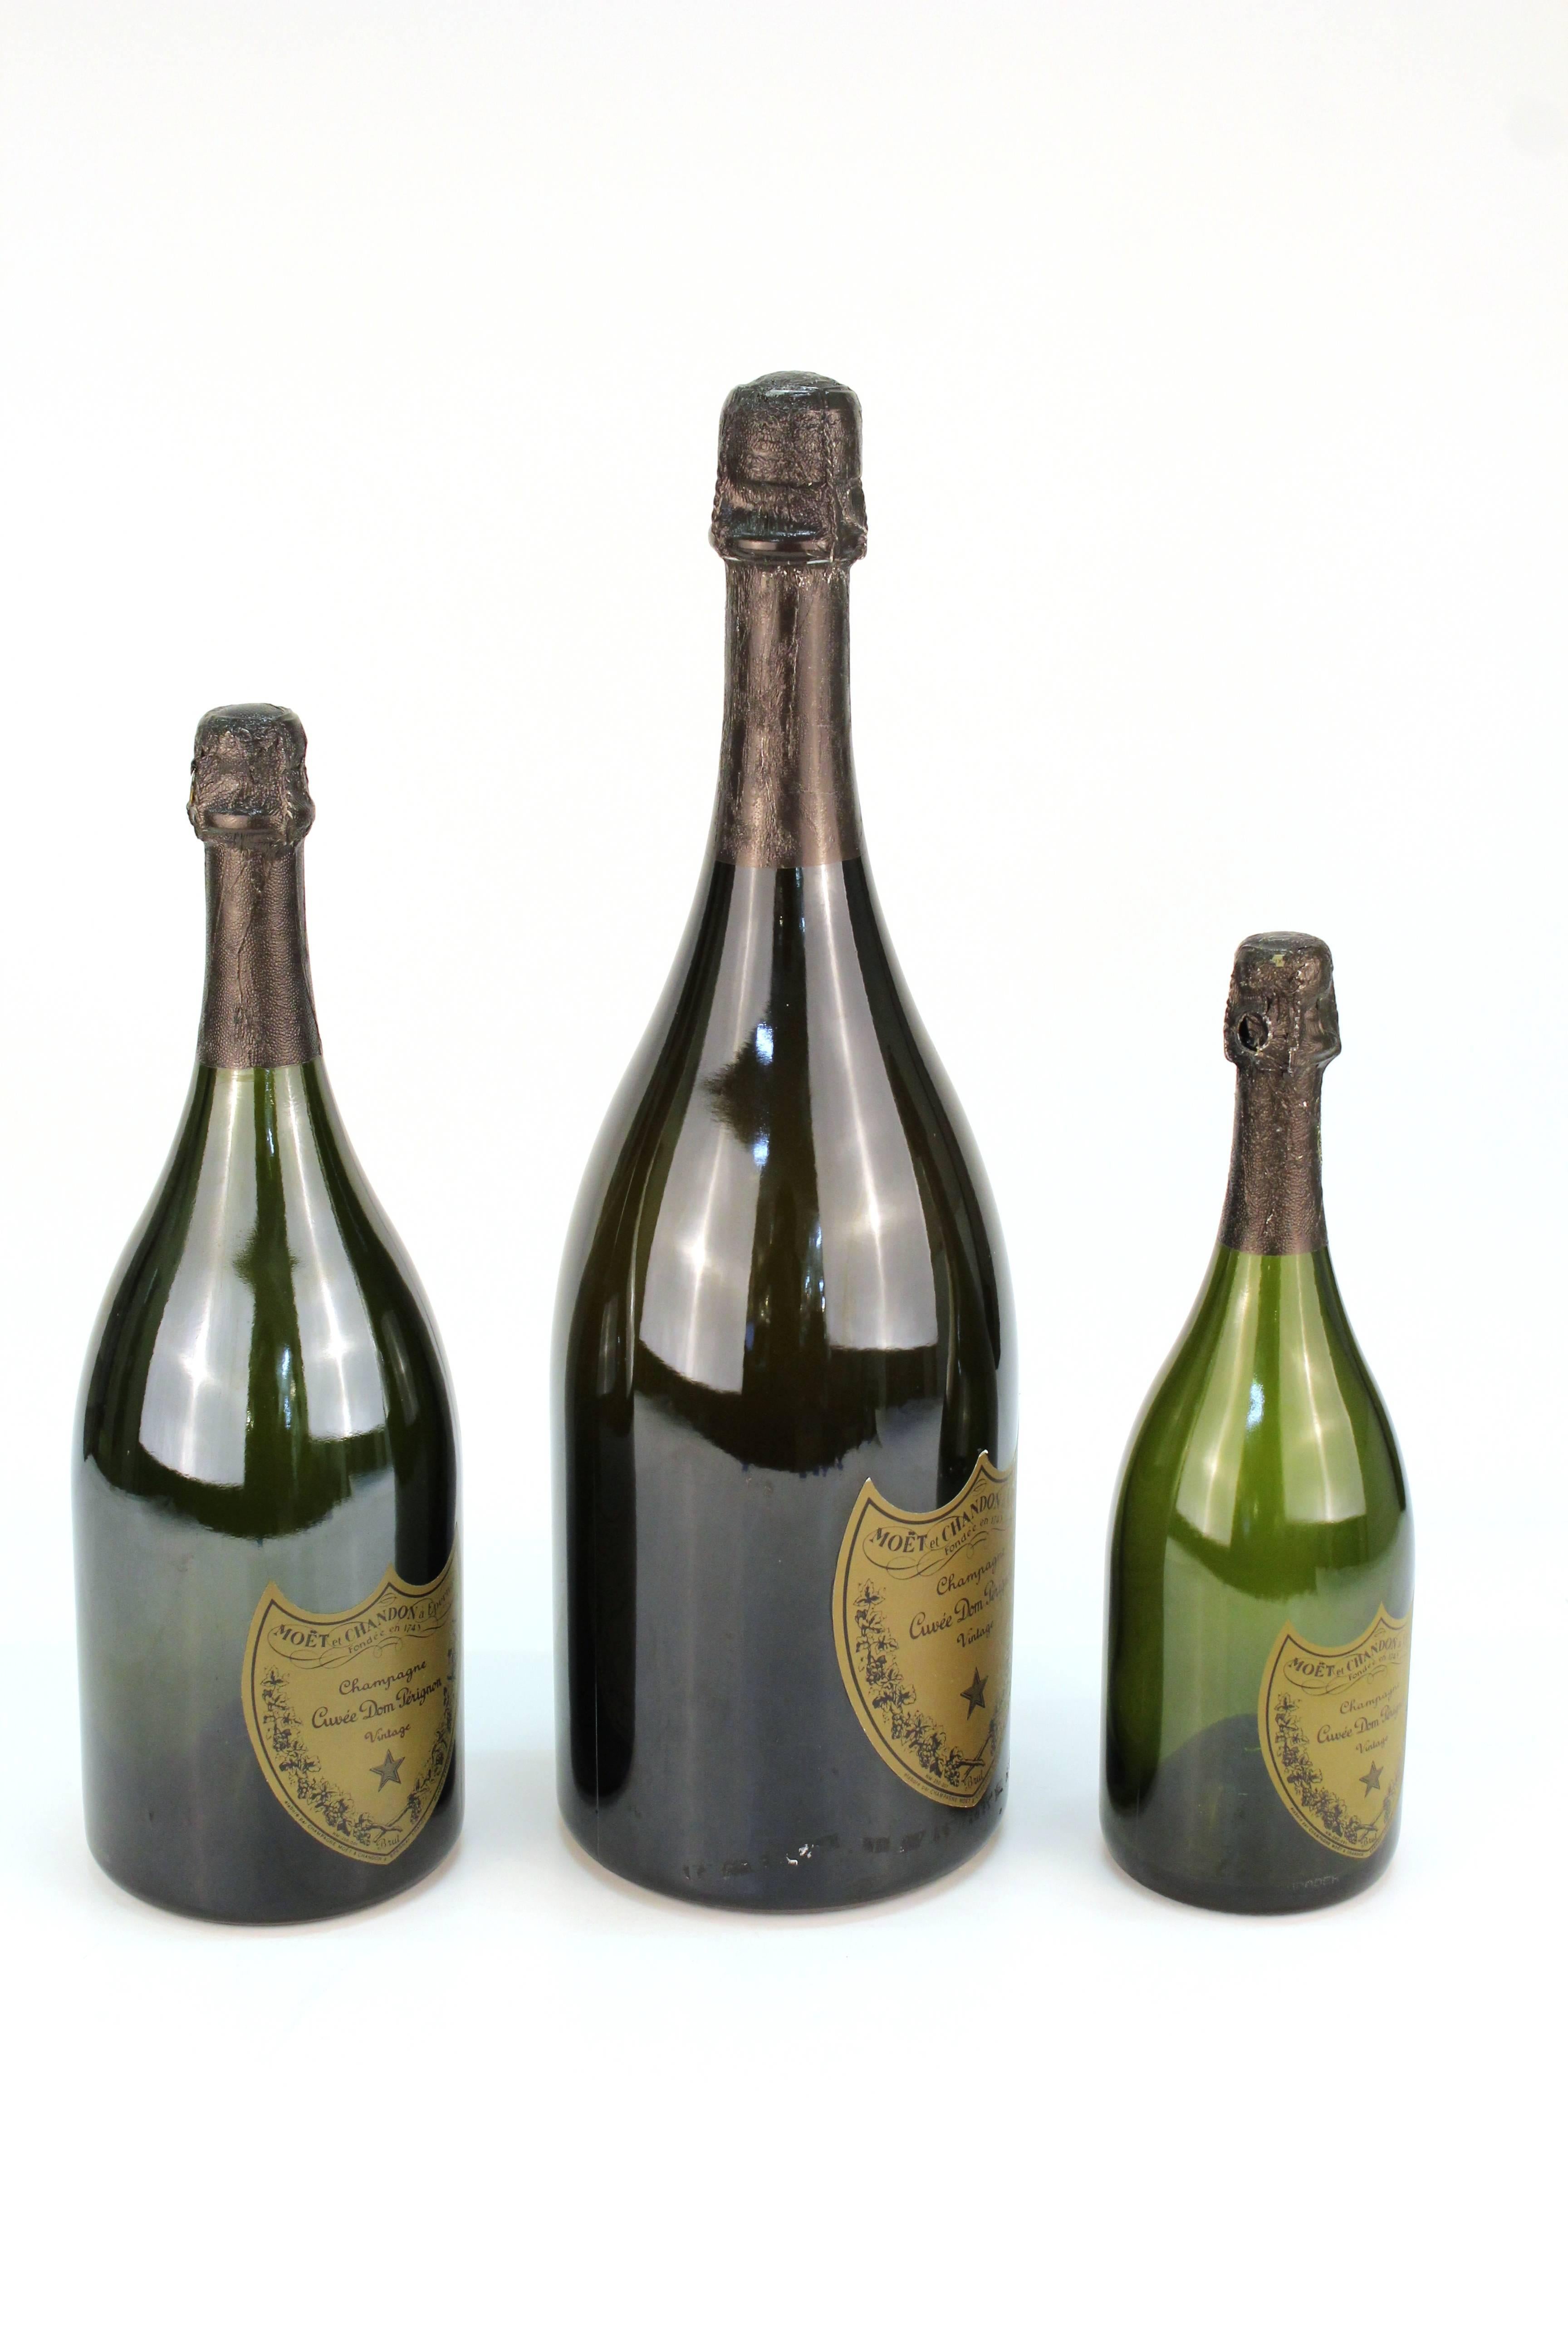 A set of three Dom Perignon champagne bottles from an advertising display. Three different sizes, each with labels and markings on bottom. Ideal for a decorative bar display.
Dimensions:
Small: 12